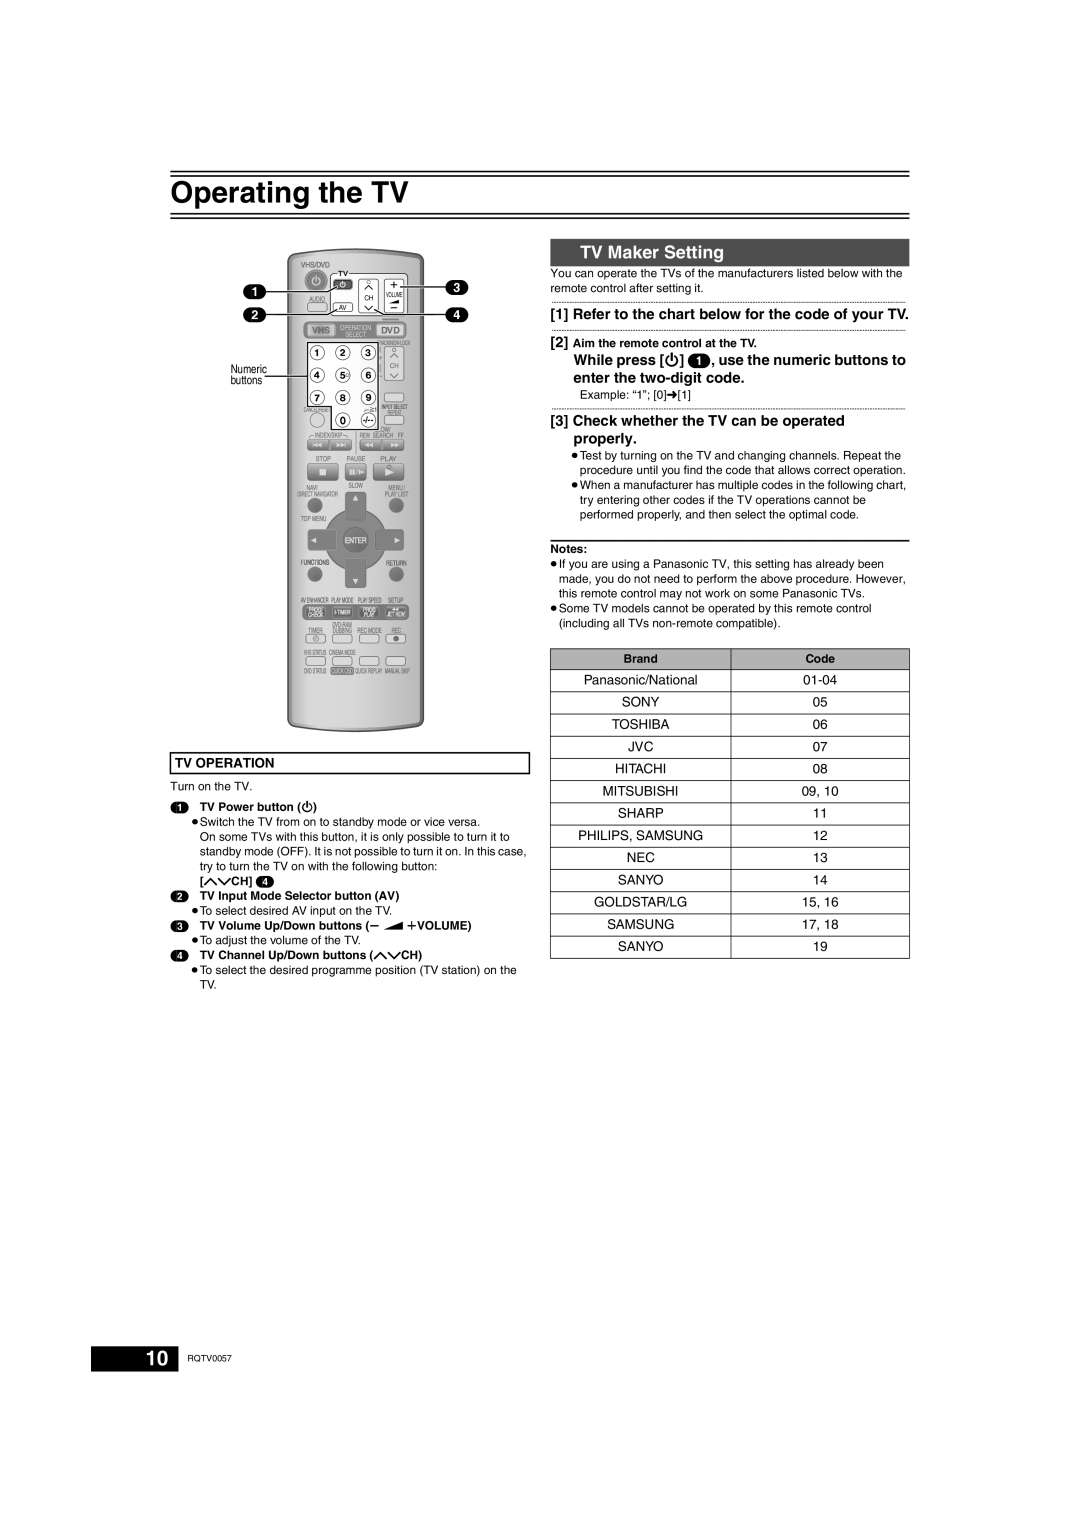 Panasonic NV-VP33 Series Operating the TV, TV Maker Setting, While press Í 1, use the numeric buttons to, properly 